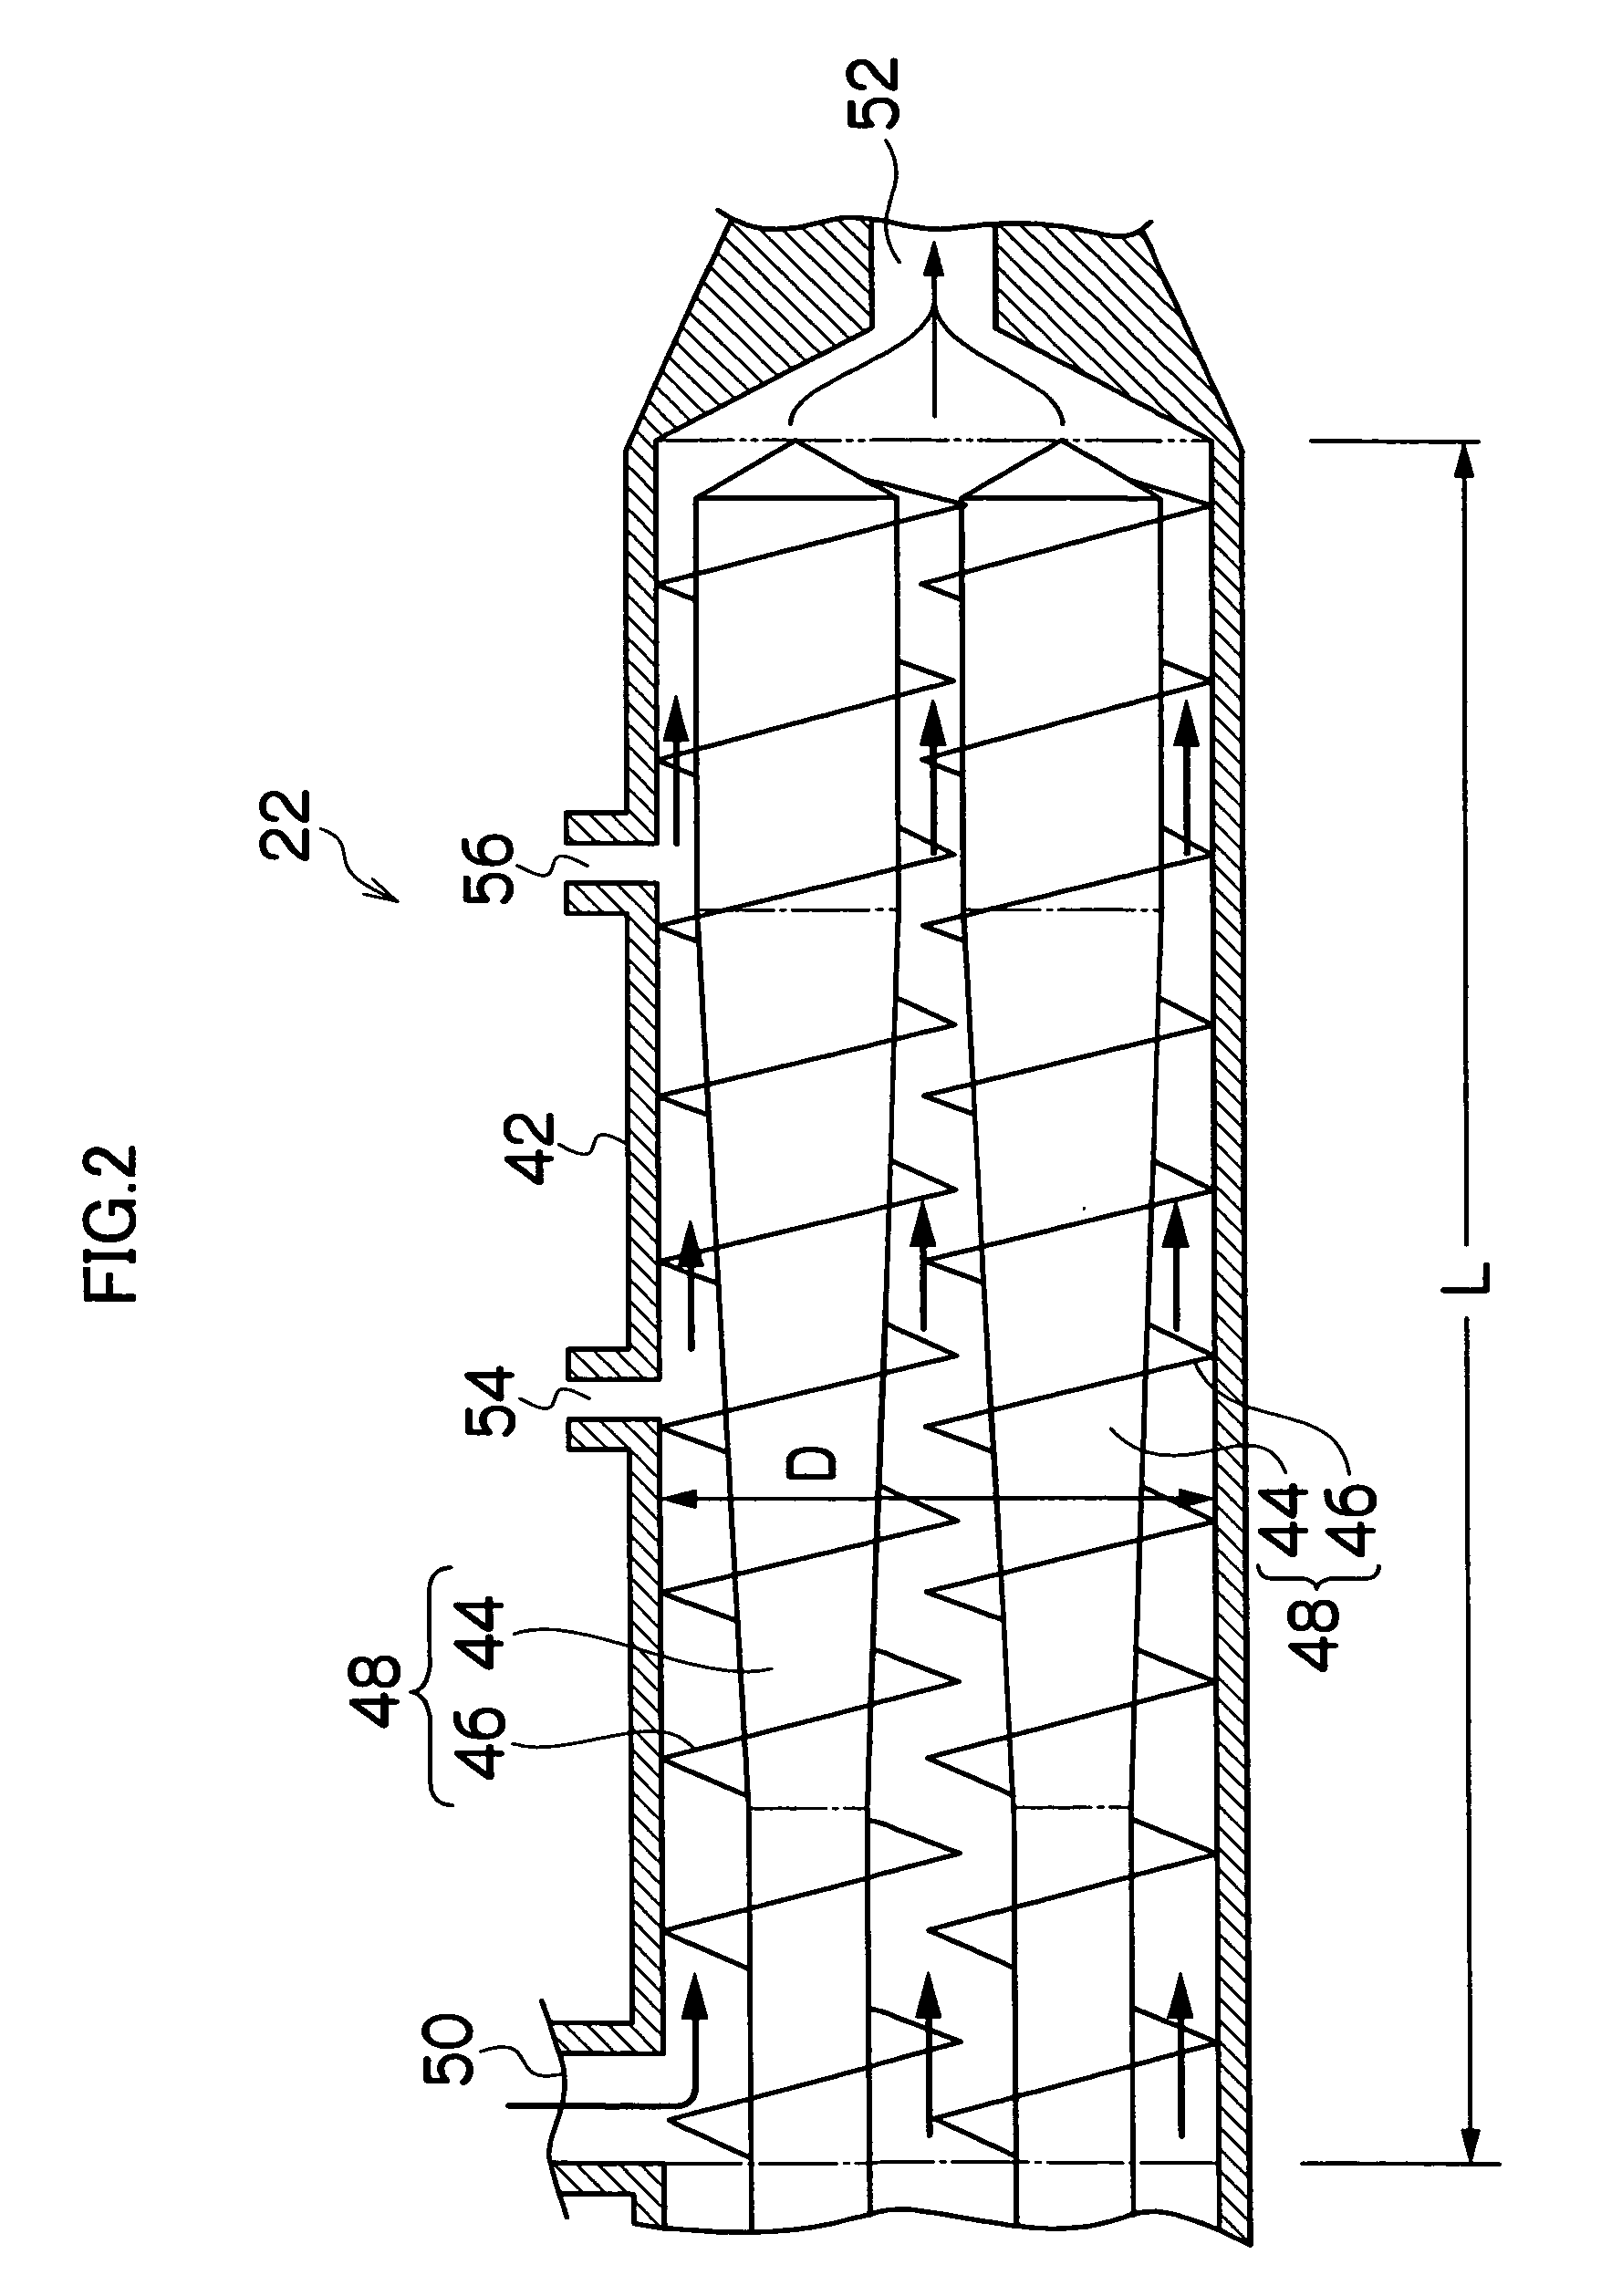 Cellulose acylate resin film and method for producing the same